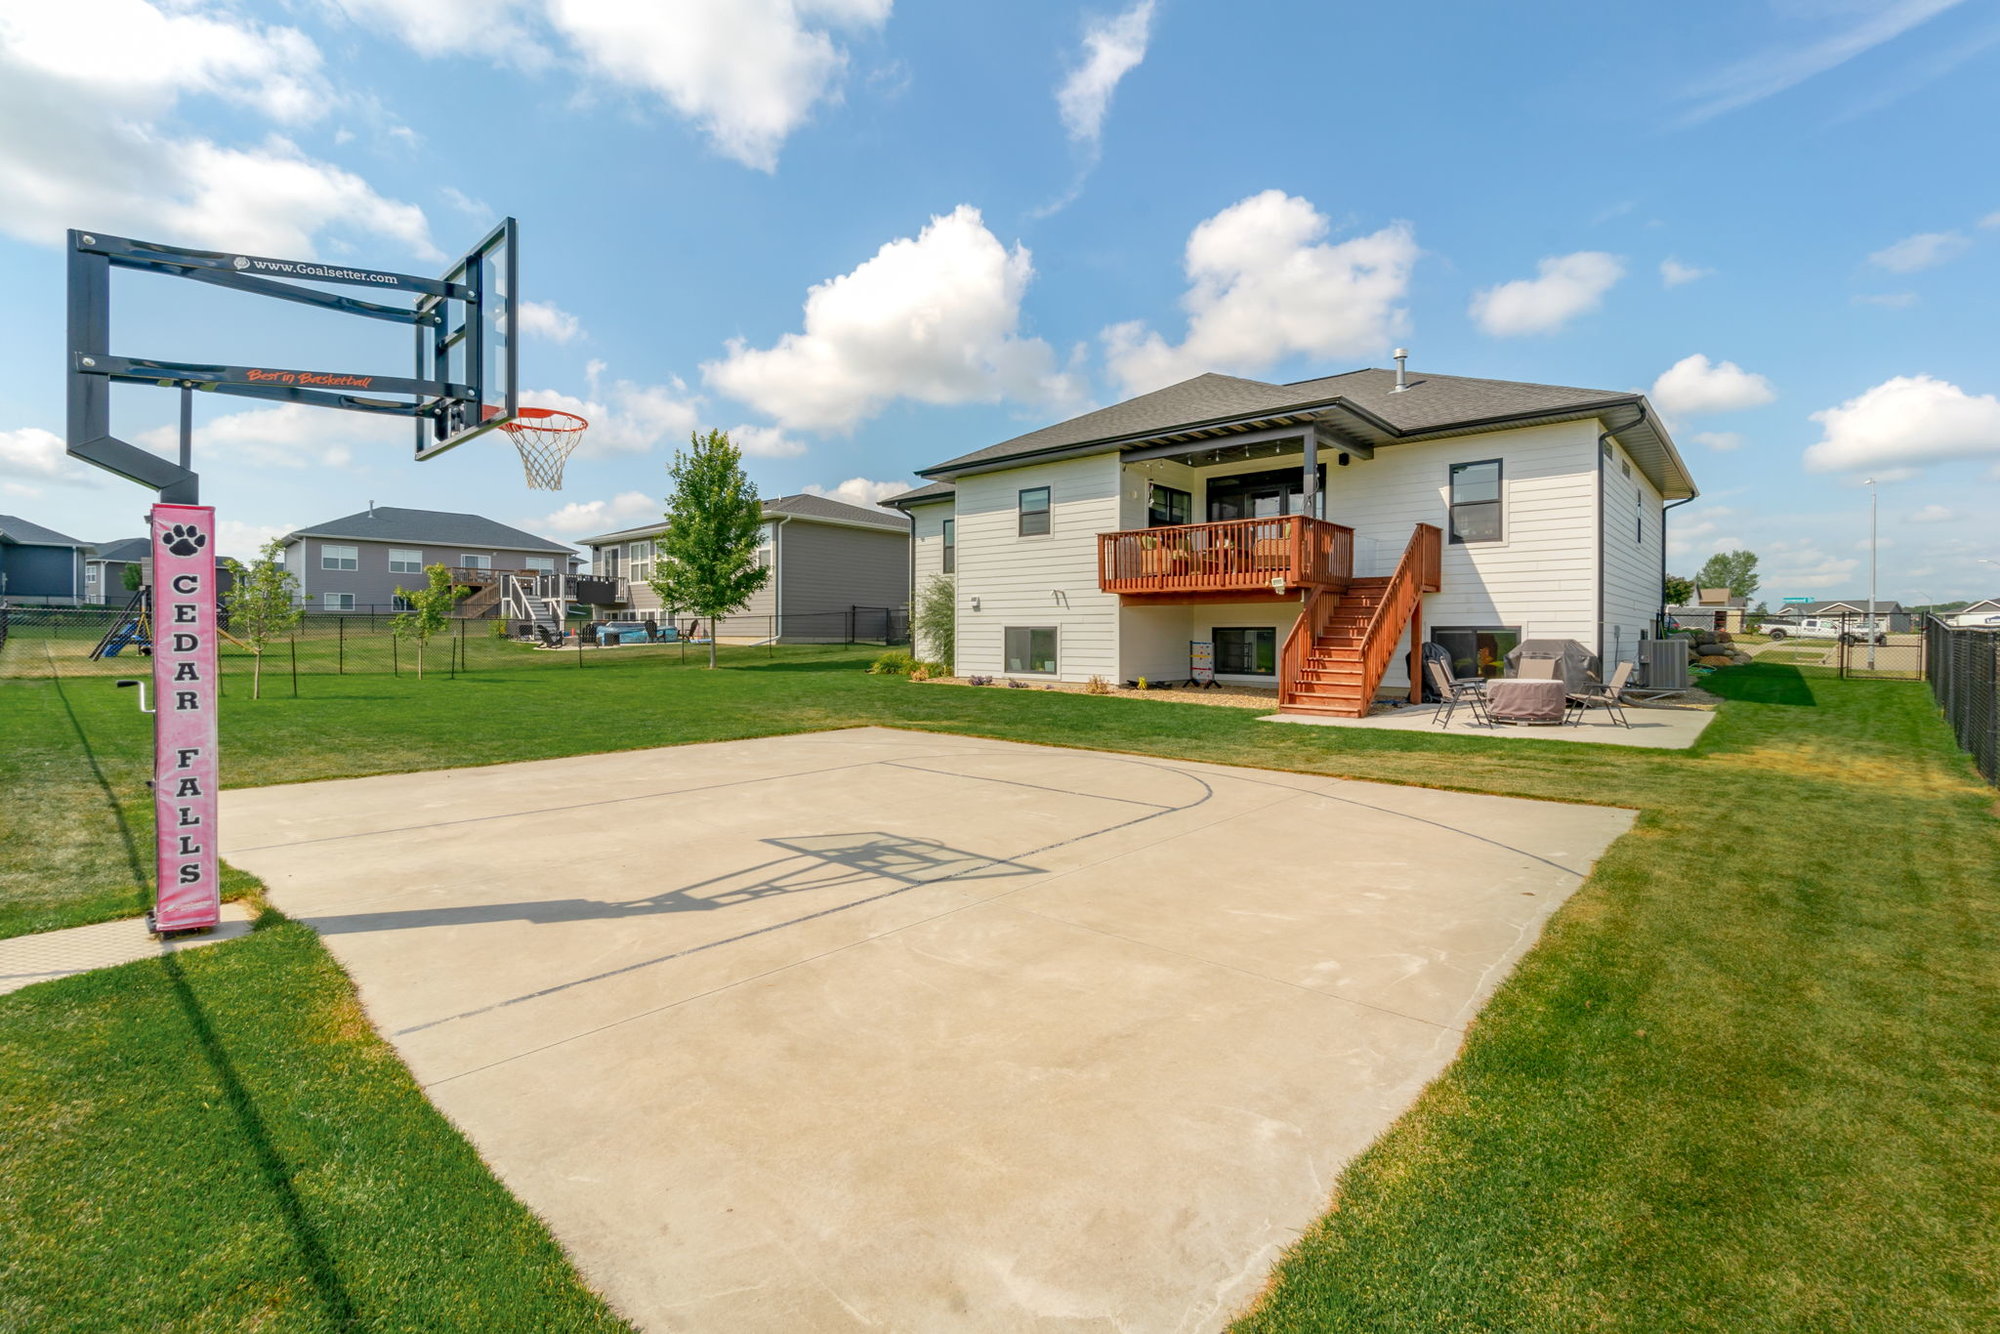 Don't Miss this Stunning Newly Built Ranch in the Prairie West Neighborhood of Cedar Falls Iowa